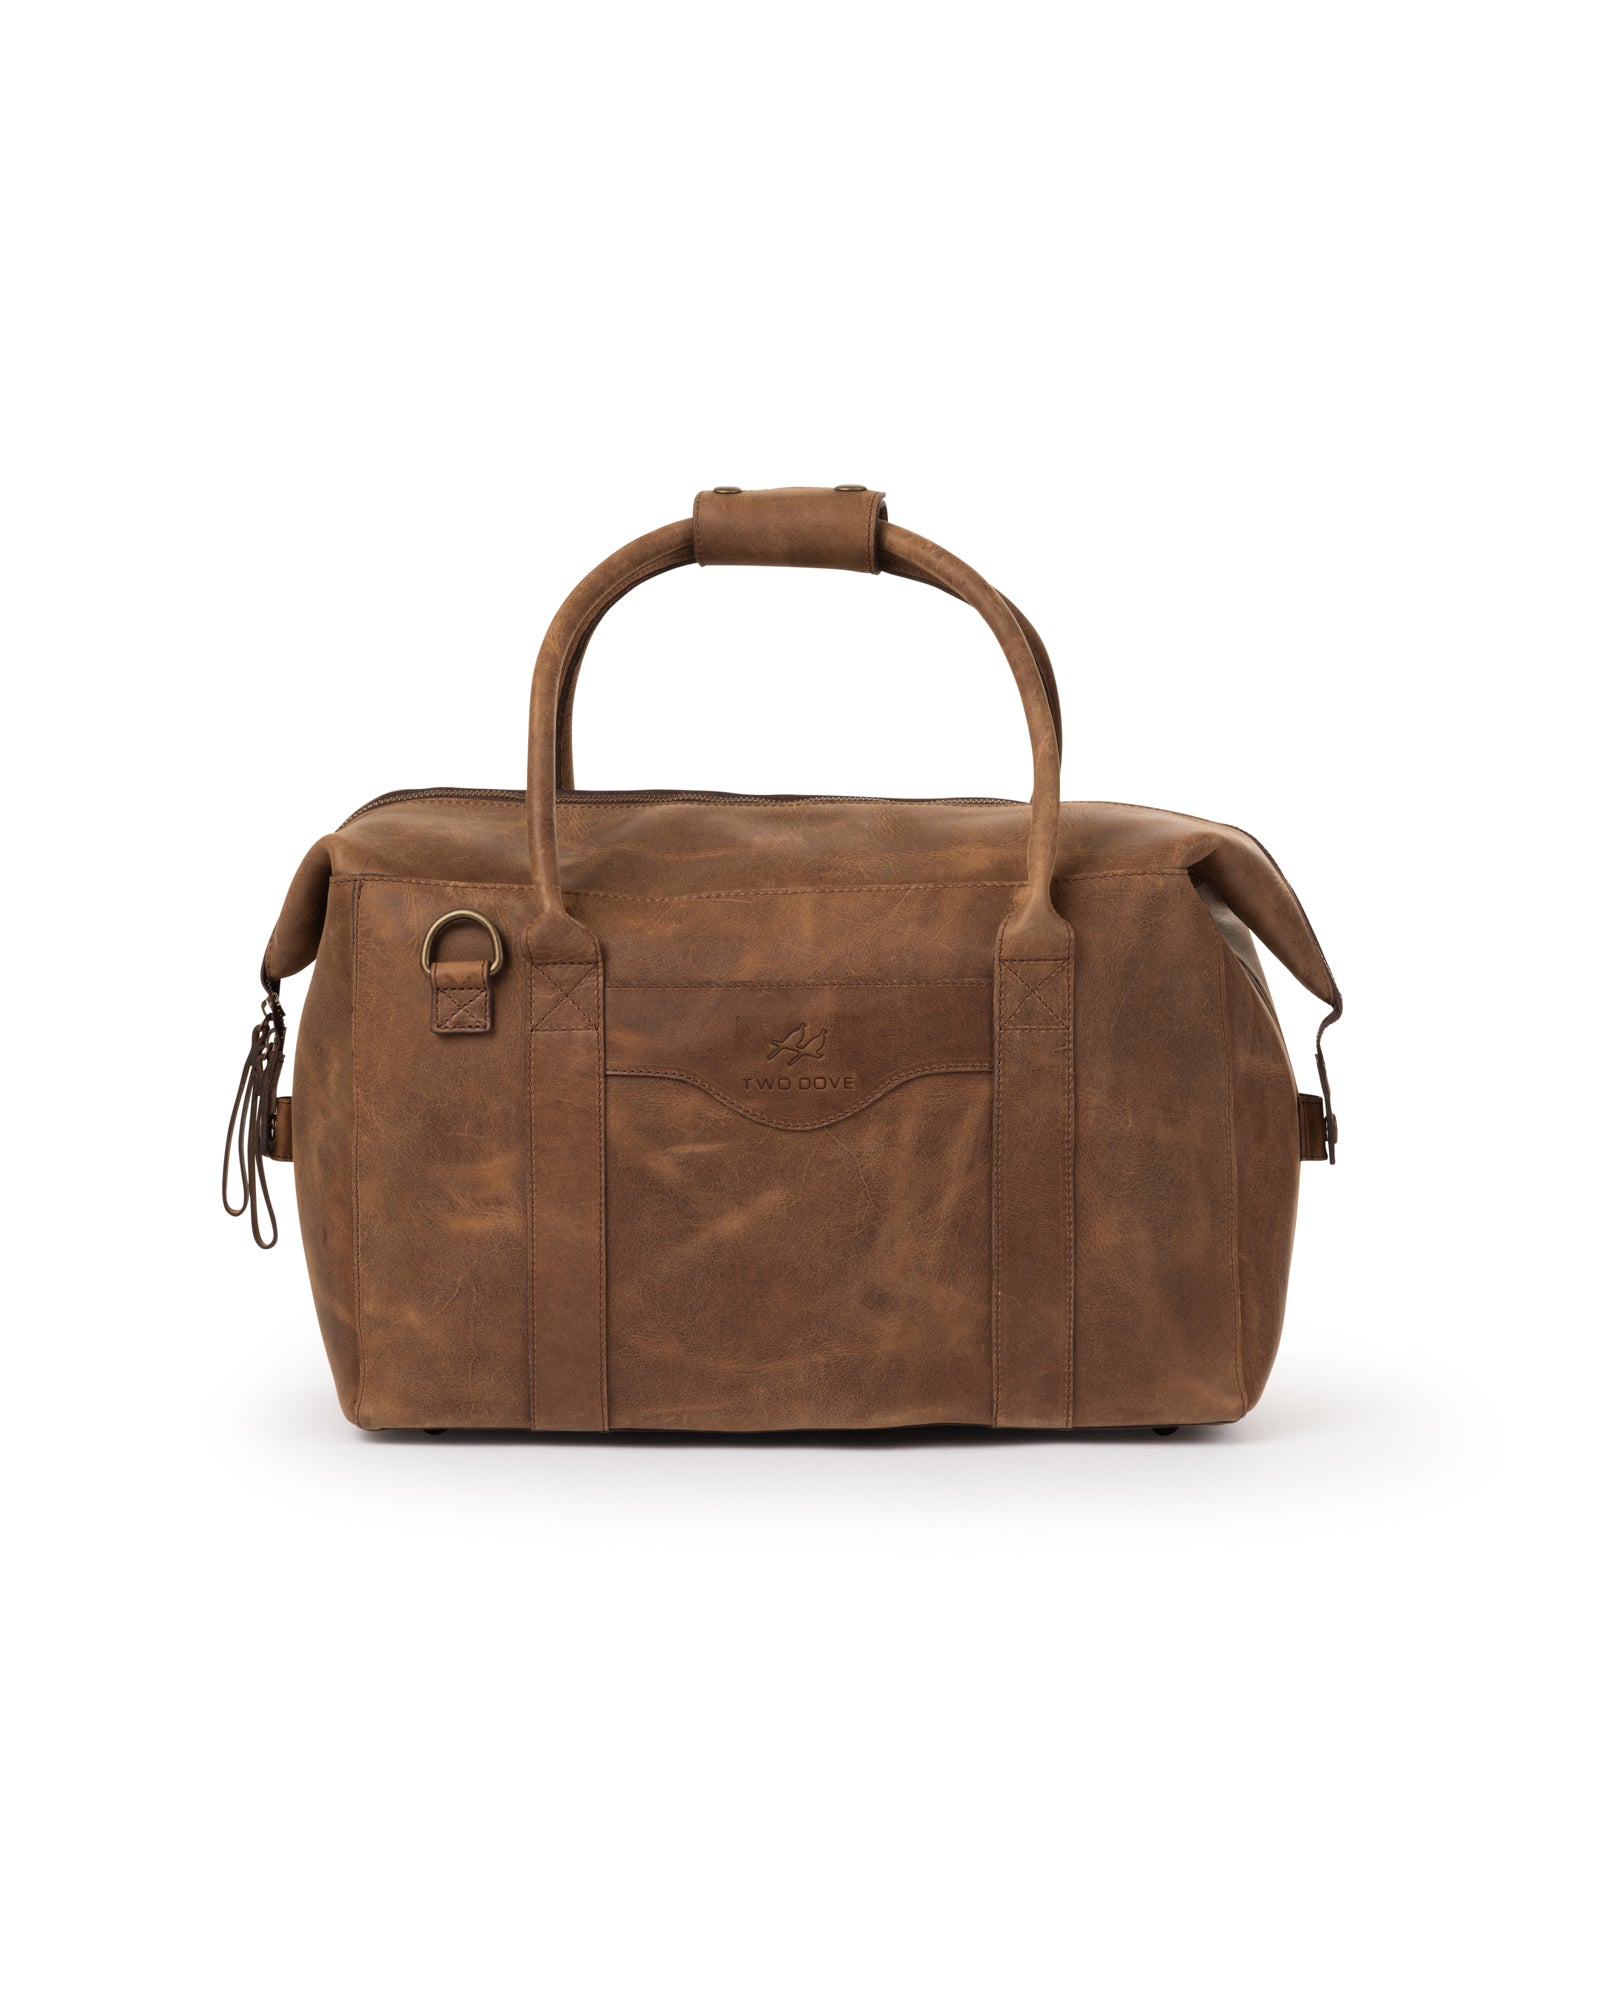 Leather Utility Cooler Bag - Two Dove Outdoors